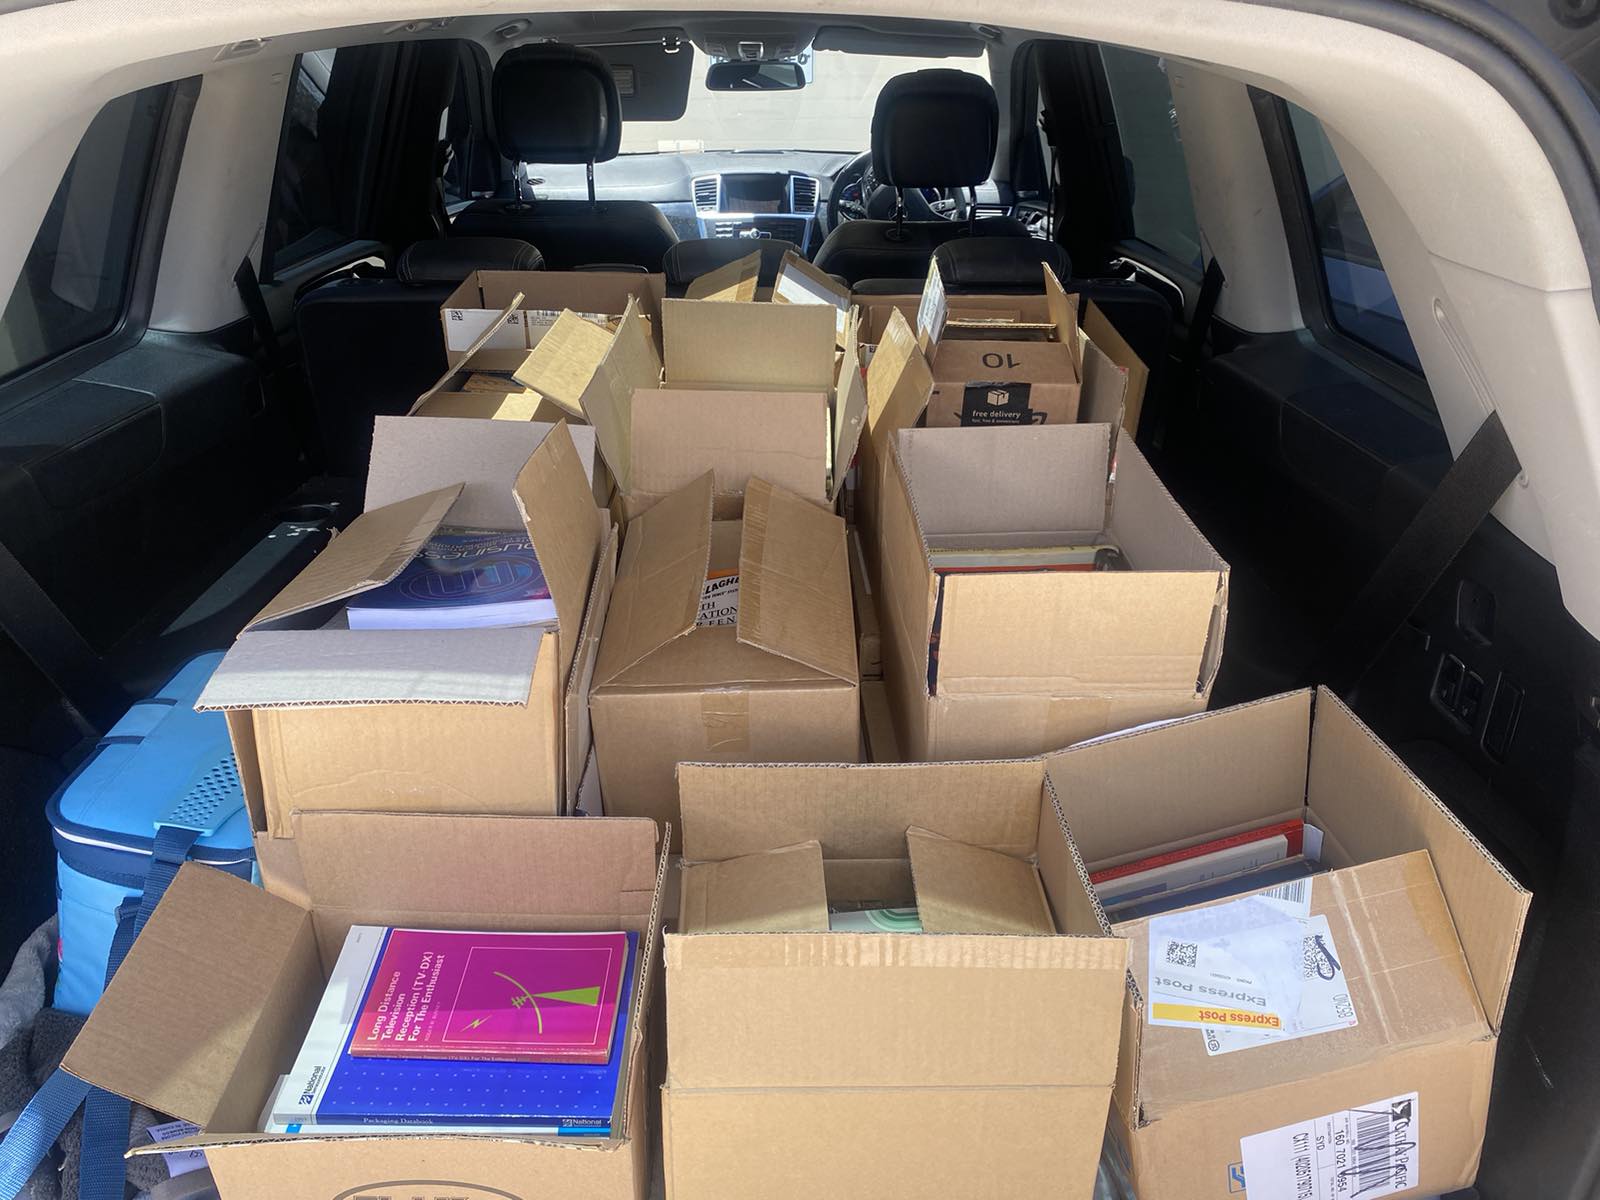 A boot full of old electronics books